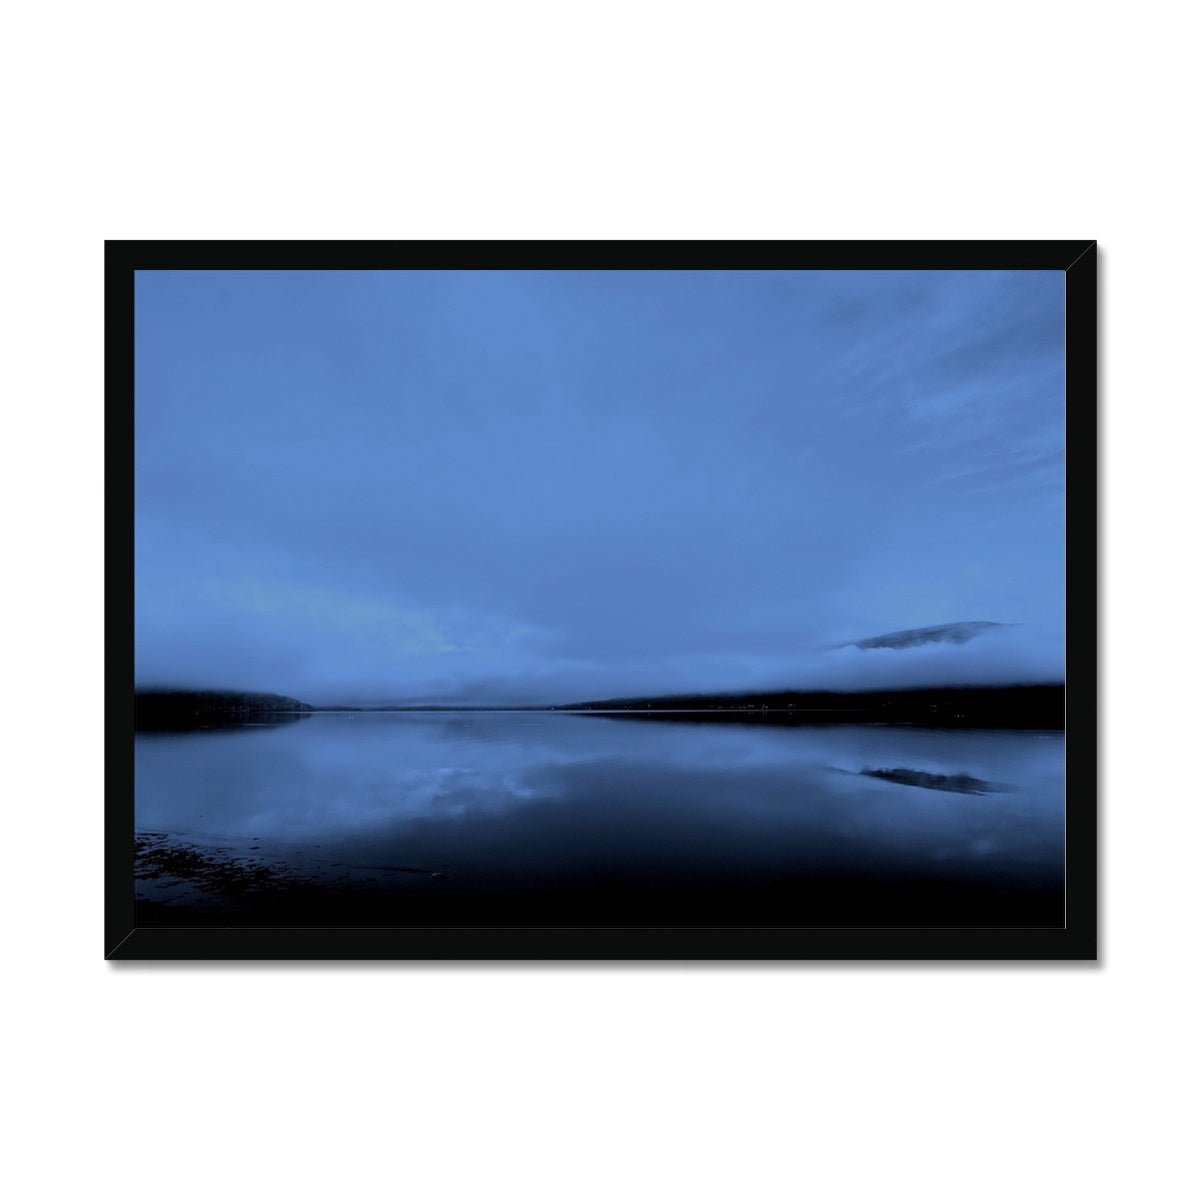 The Blue Hour Loch Fyne Painting | Framed Prints From Scotland-Framed Prints-Scottish Lochs & Mountains Art Gallery-A2 Landscape-Black Frame-Paintings, Prints, Homeware, Art Gifts From Scotland By Scottish Artist Kevin Hunter